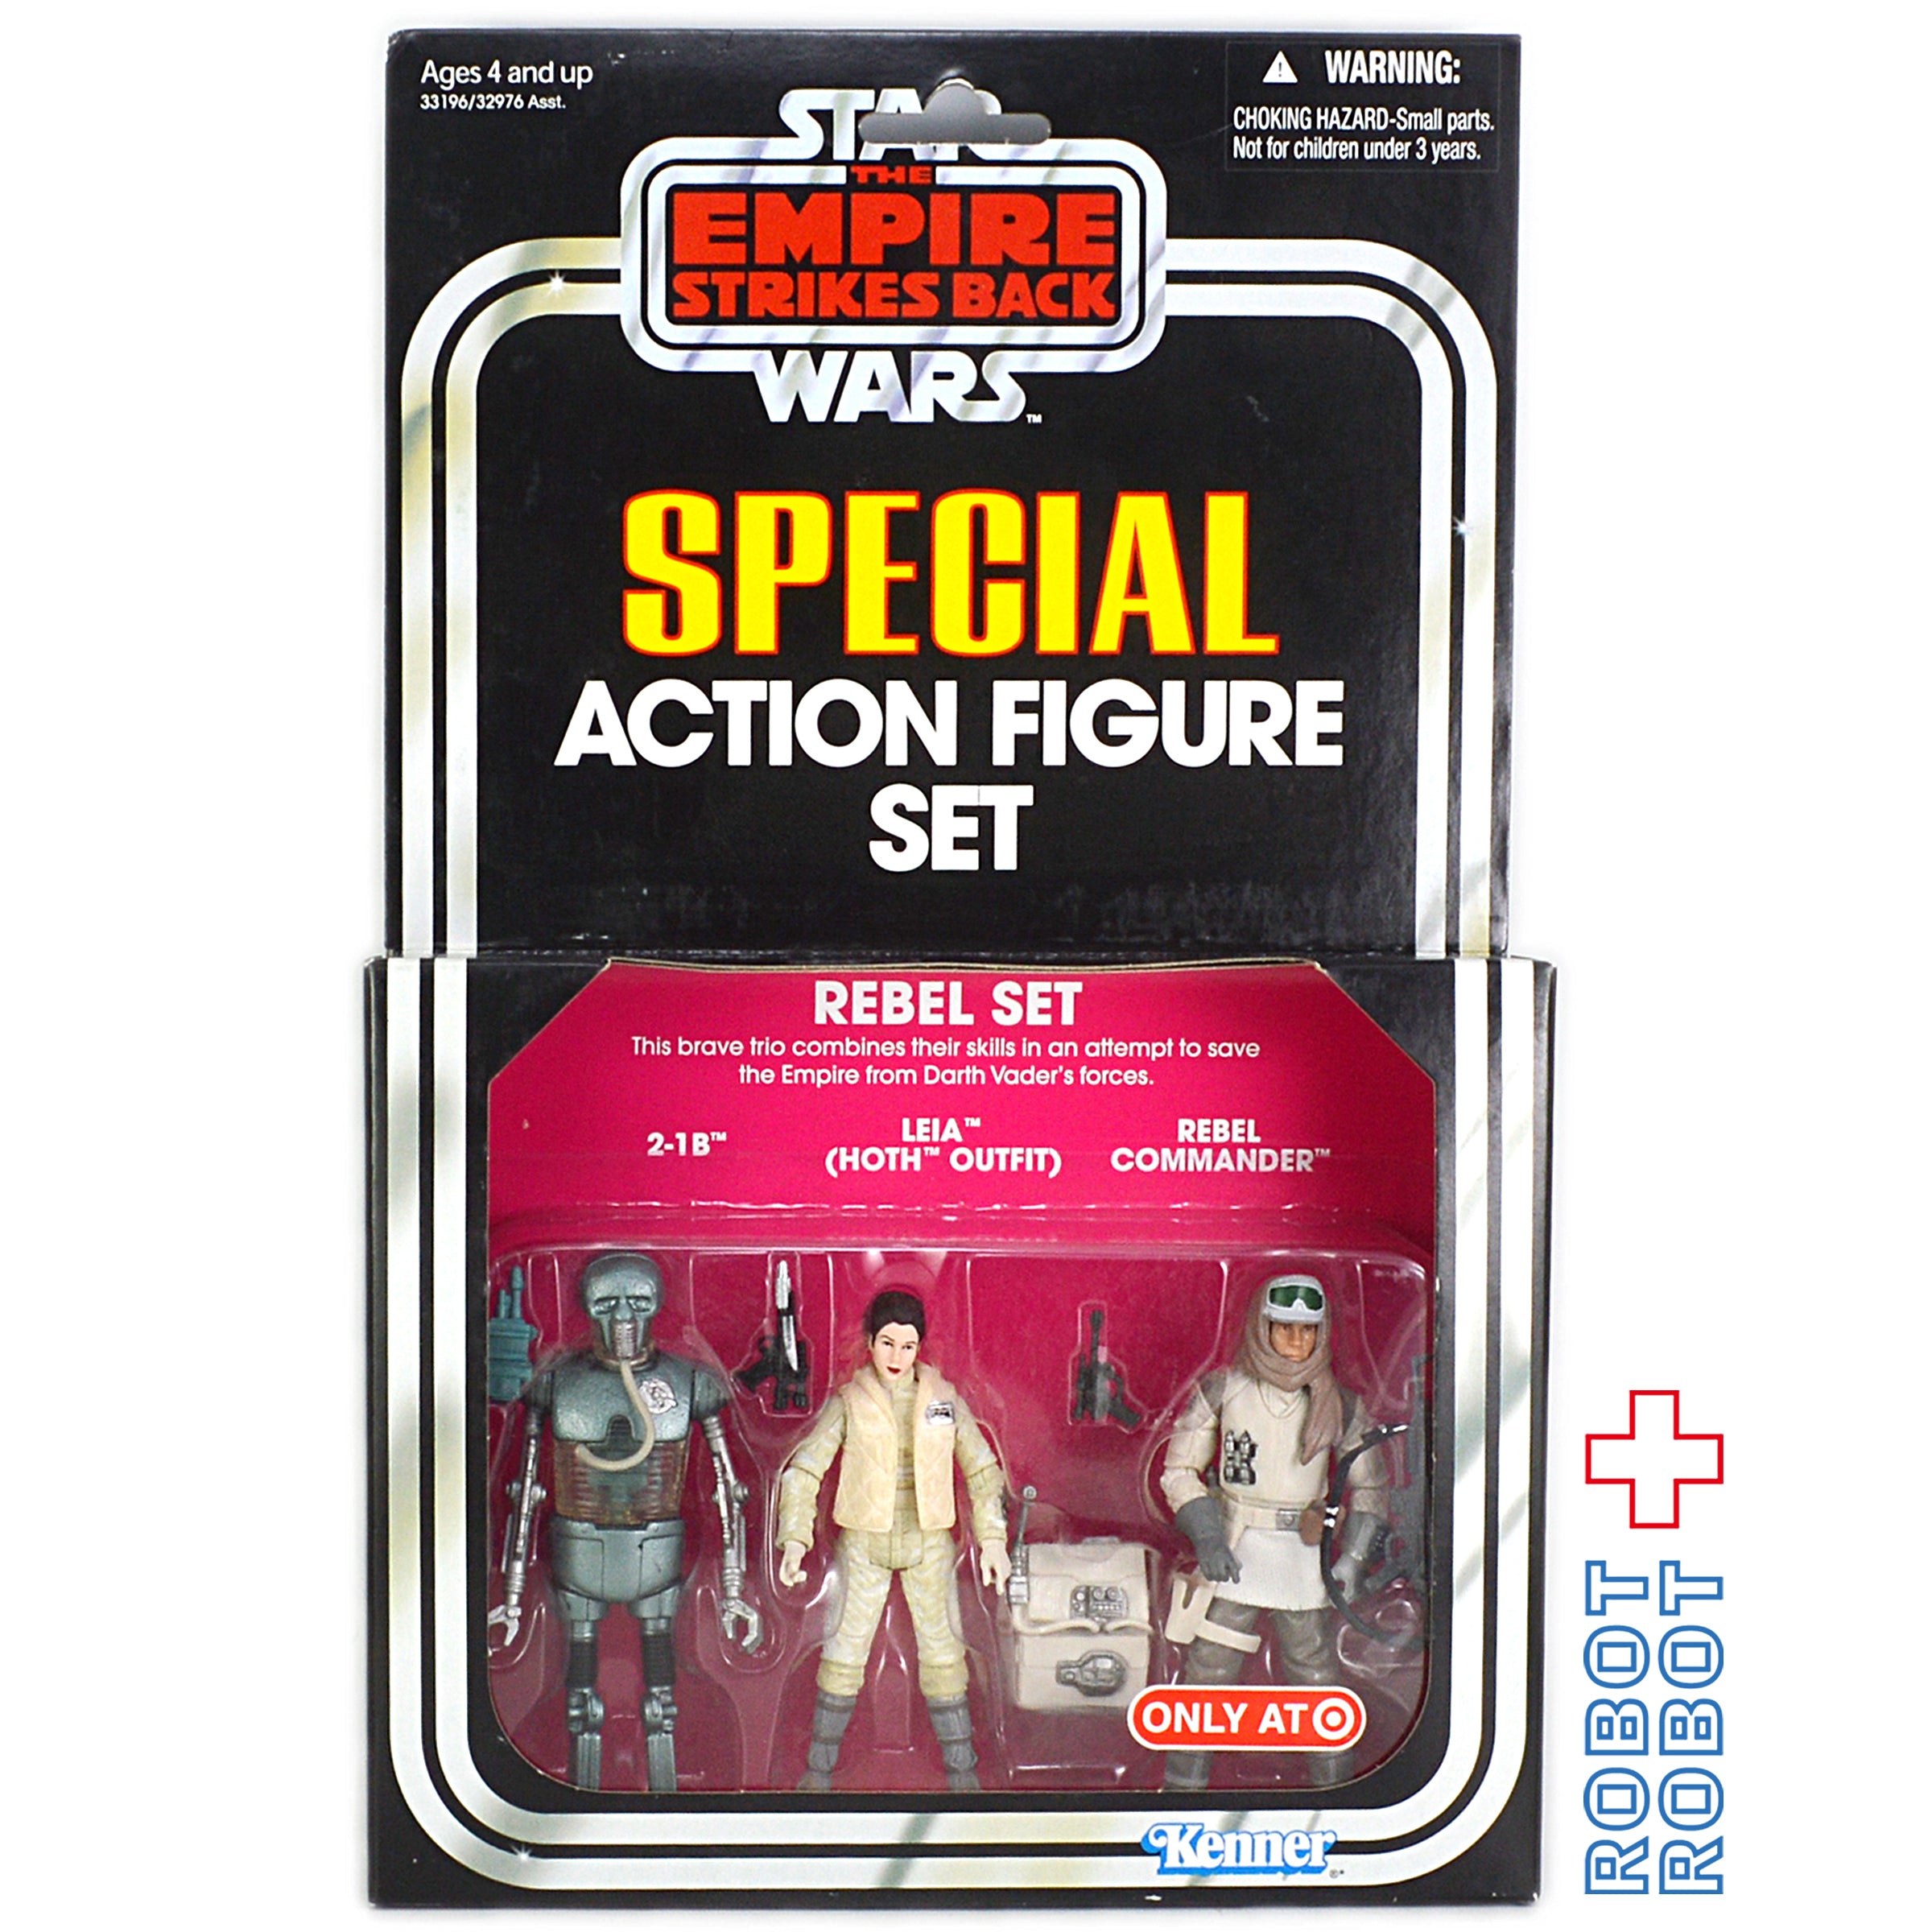 STAR WARS VINTAGE COLLECTION all – tagged 